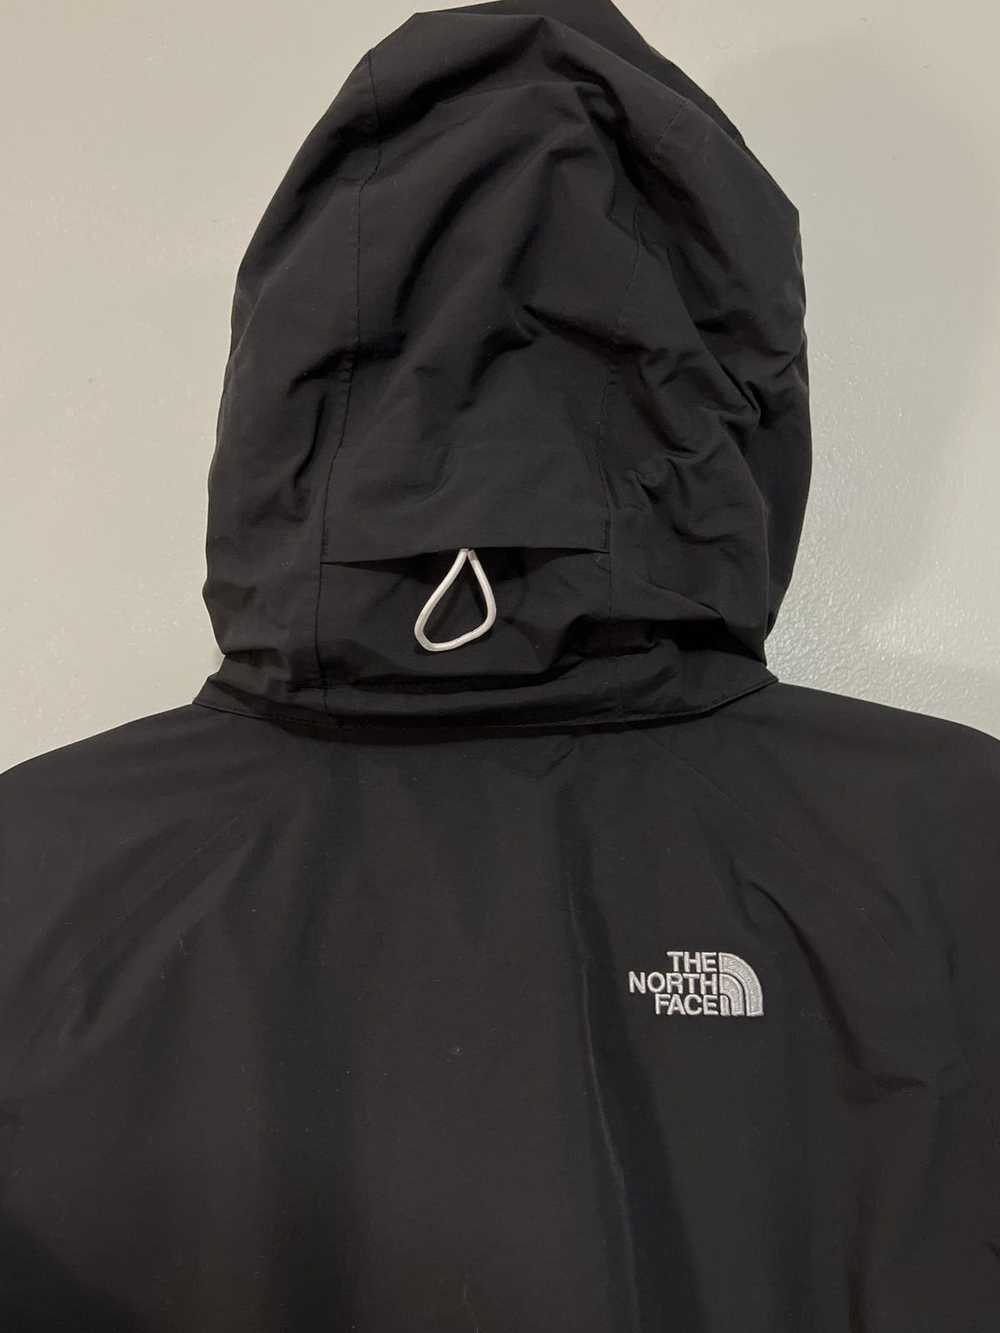 Vintage The North face Winter Jacket - image 6